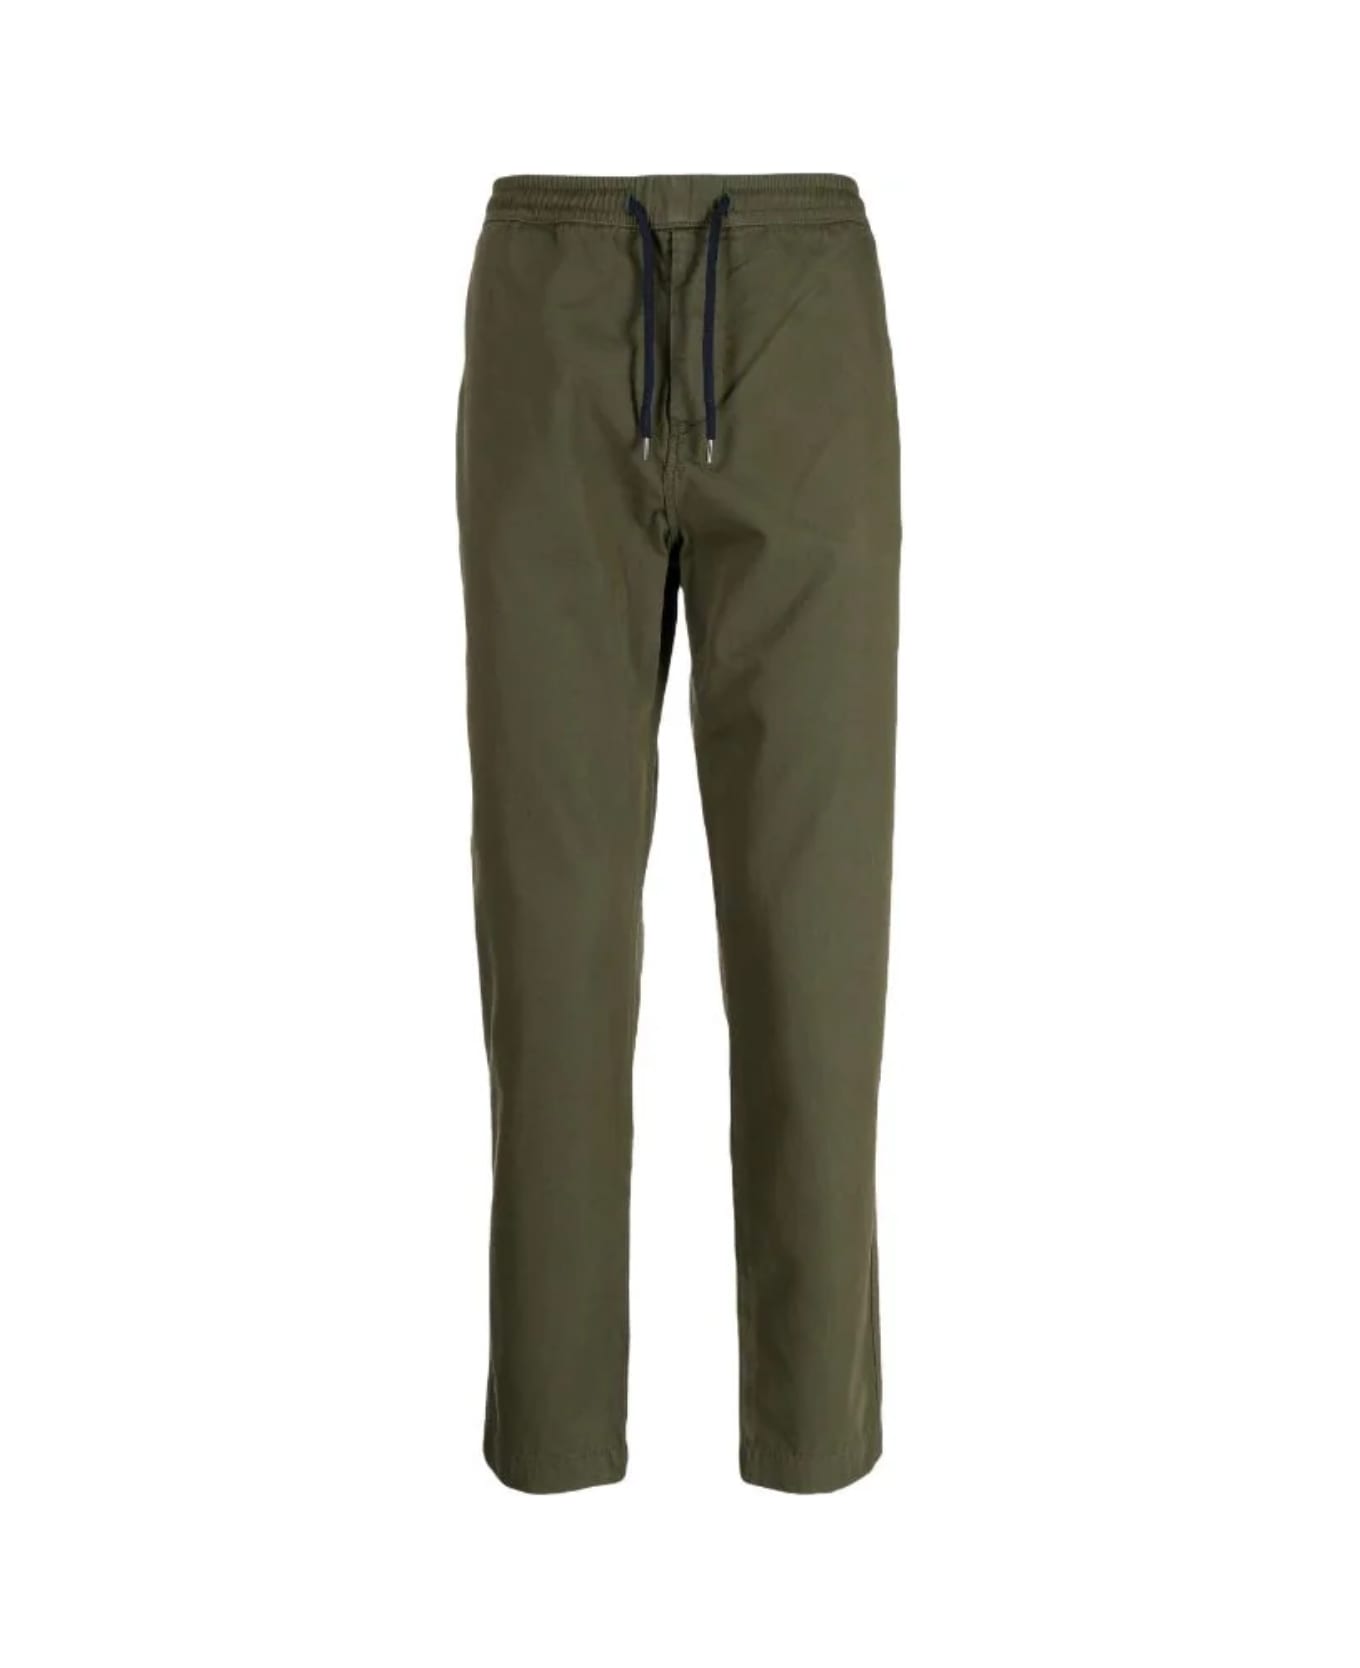 PS by Paul Smith Mens Drawstring Trouser - Greens ボトムス